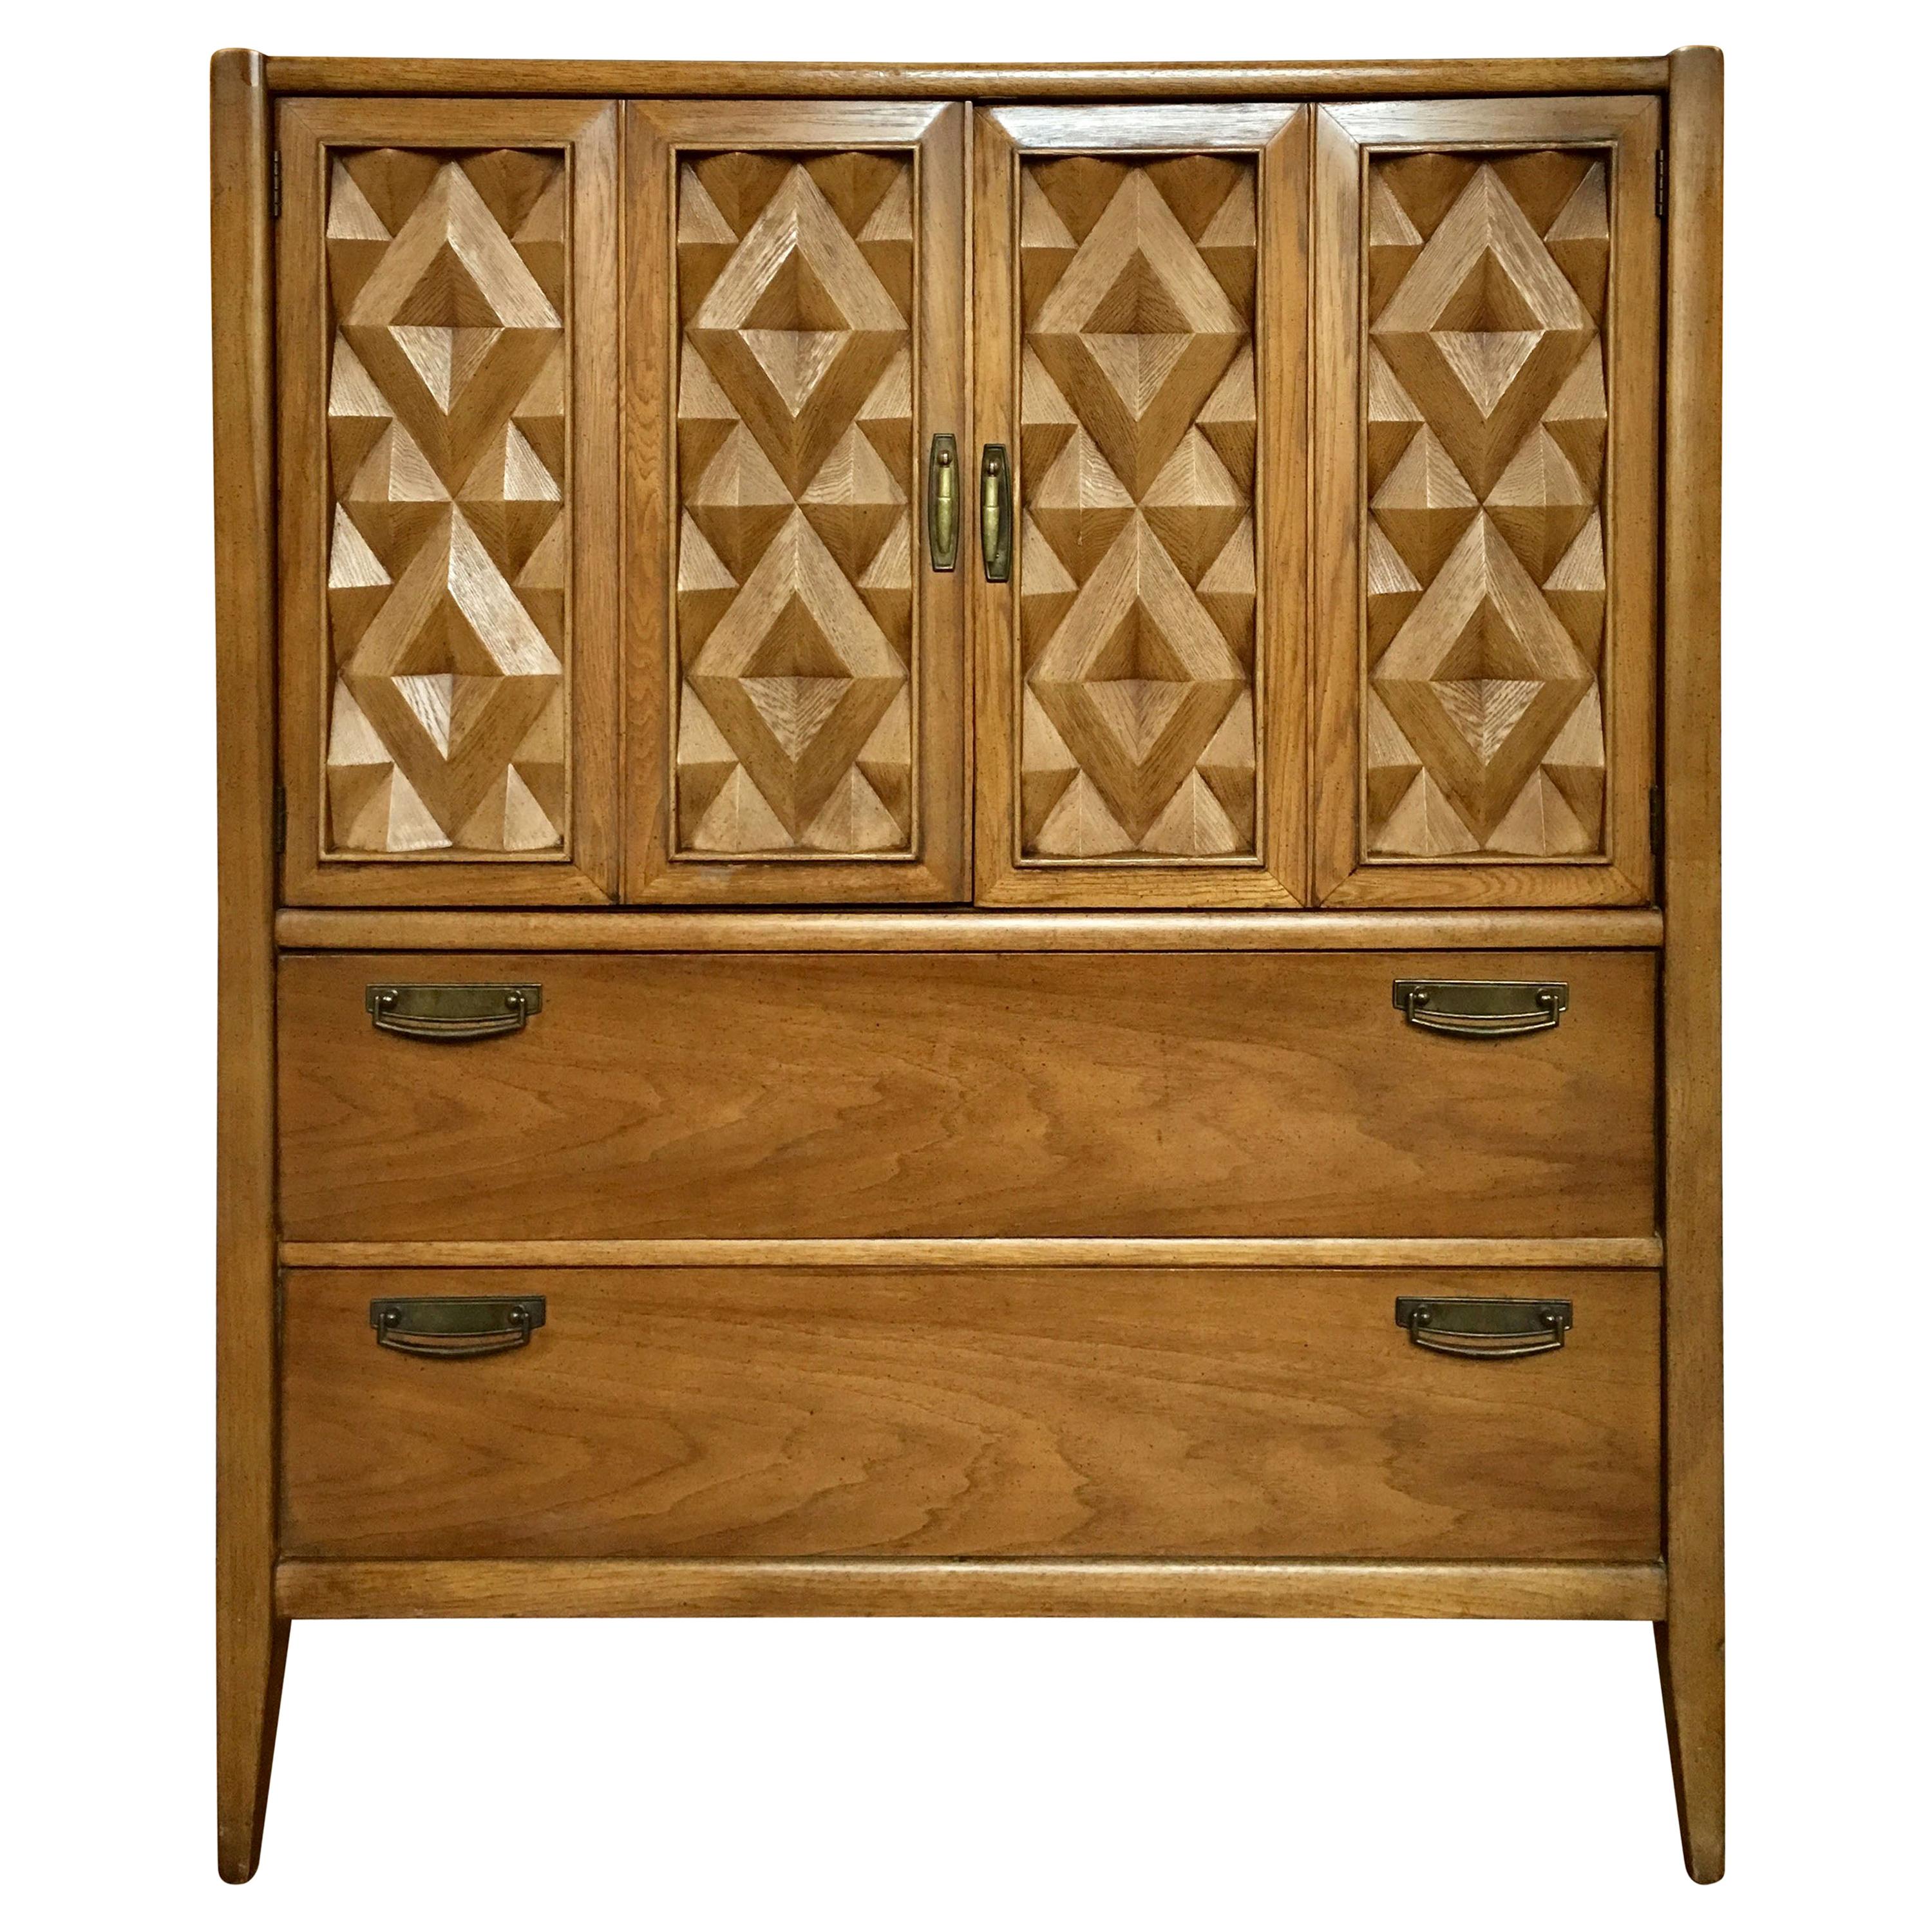 Brutalist Geometric Cubist Carved Mid-Century Modern Armoire Bar Cabinet Chest 